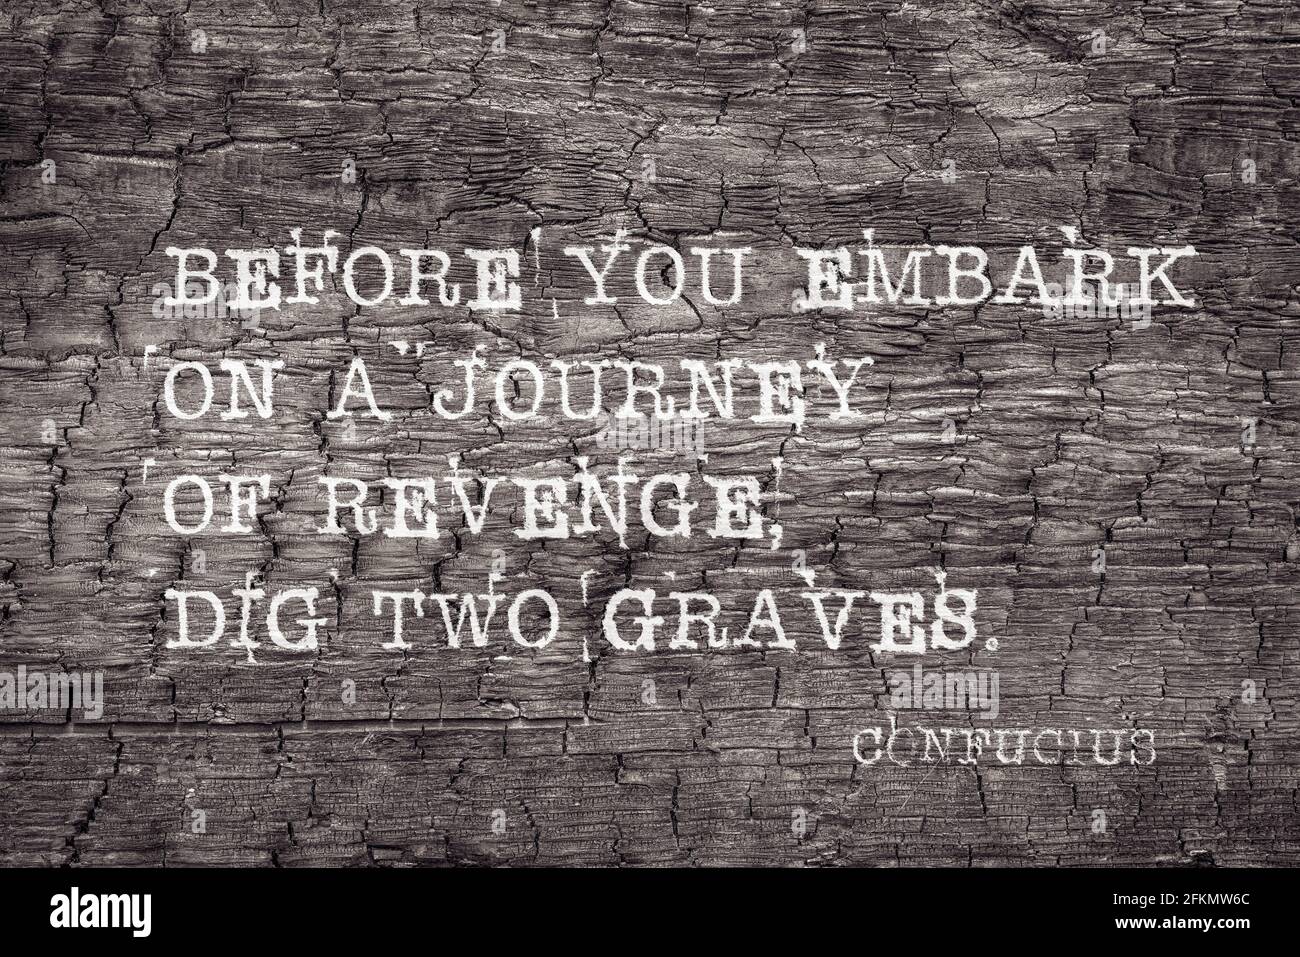 Before you embark on a journey of revenge, dig two graves - ancient Chinese philosopher Confucius quote printed on burned wood board Stock Photo